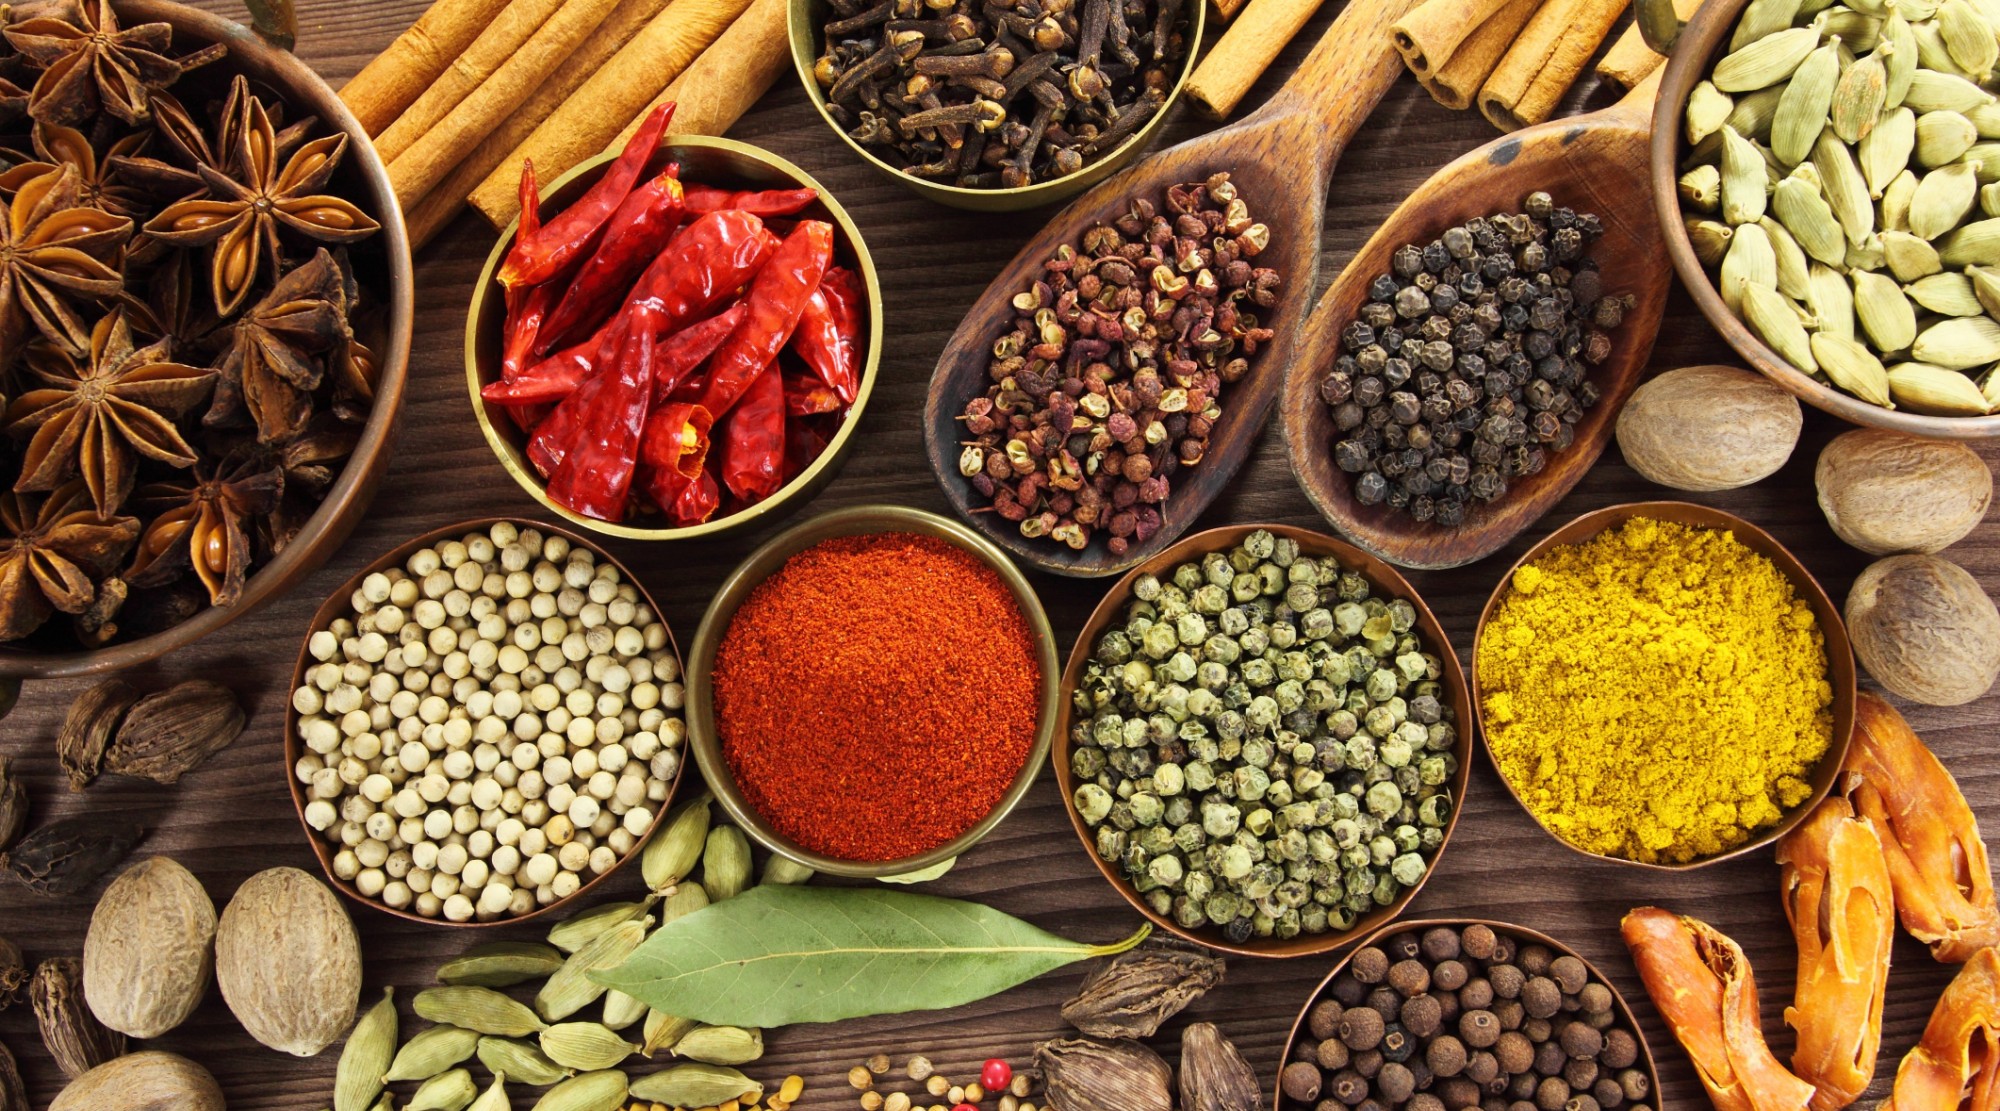 Culinary spices